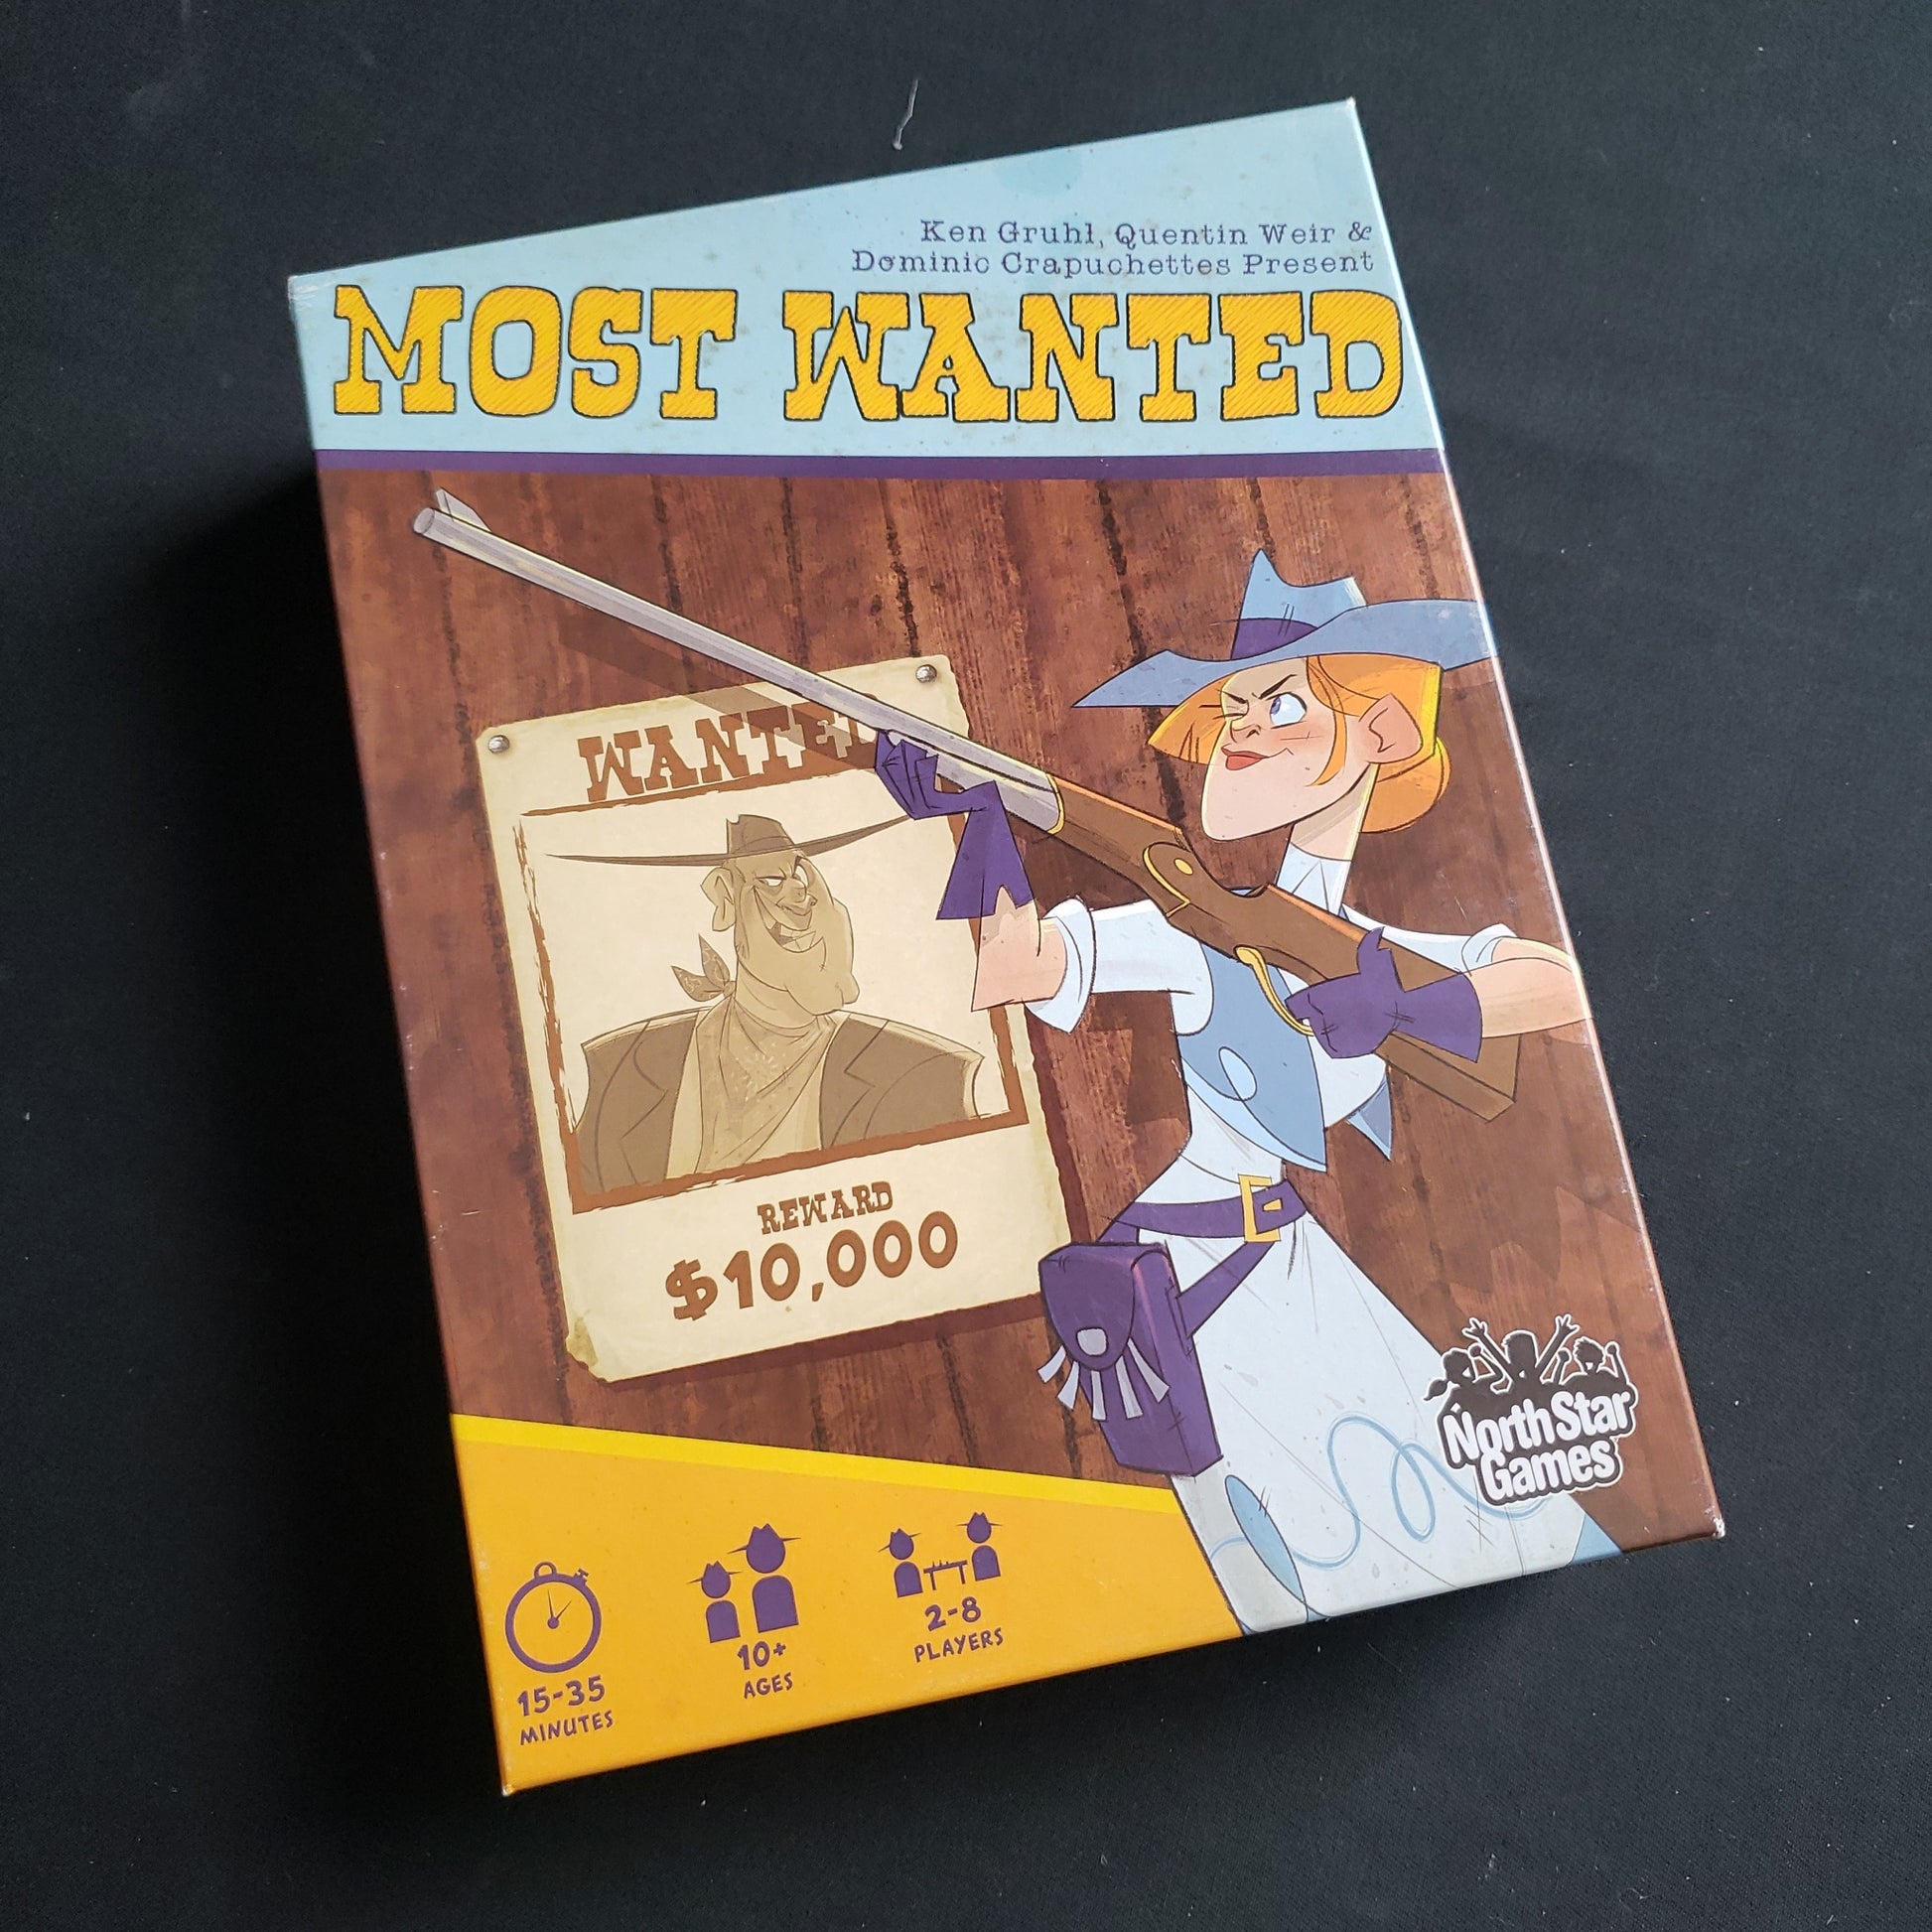 Image shows the front cover of the box of the Most Wanted card game